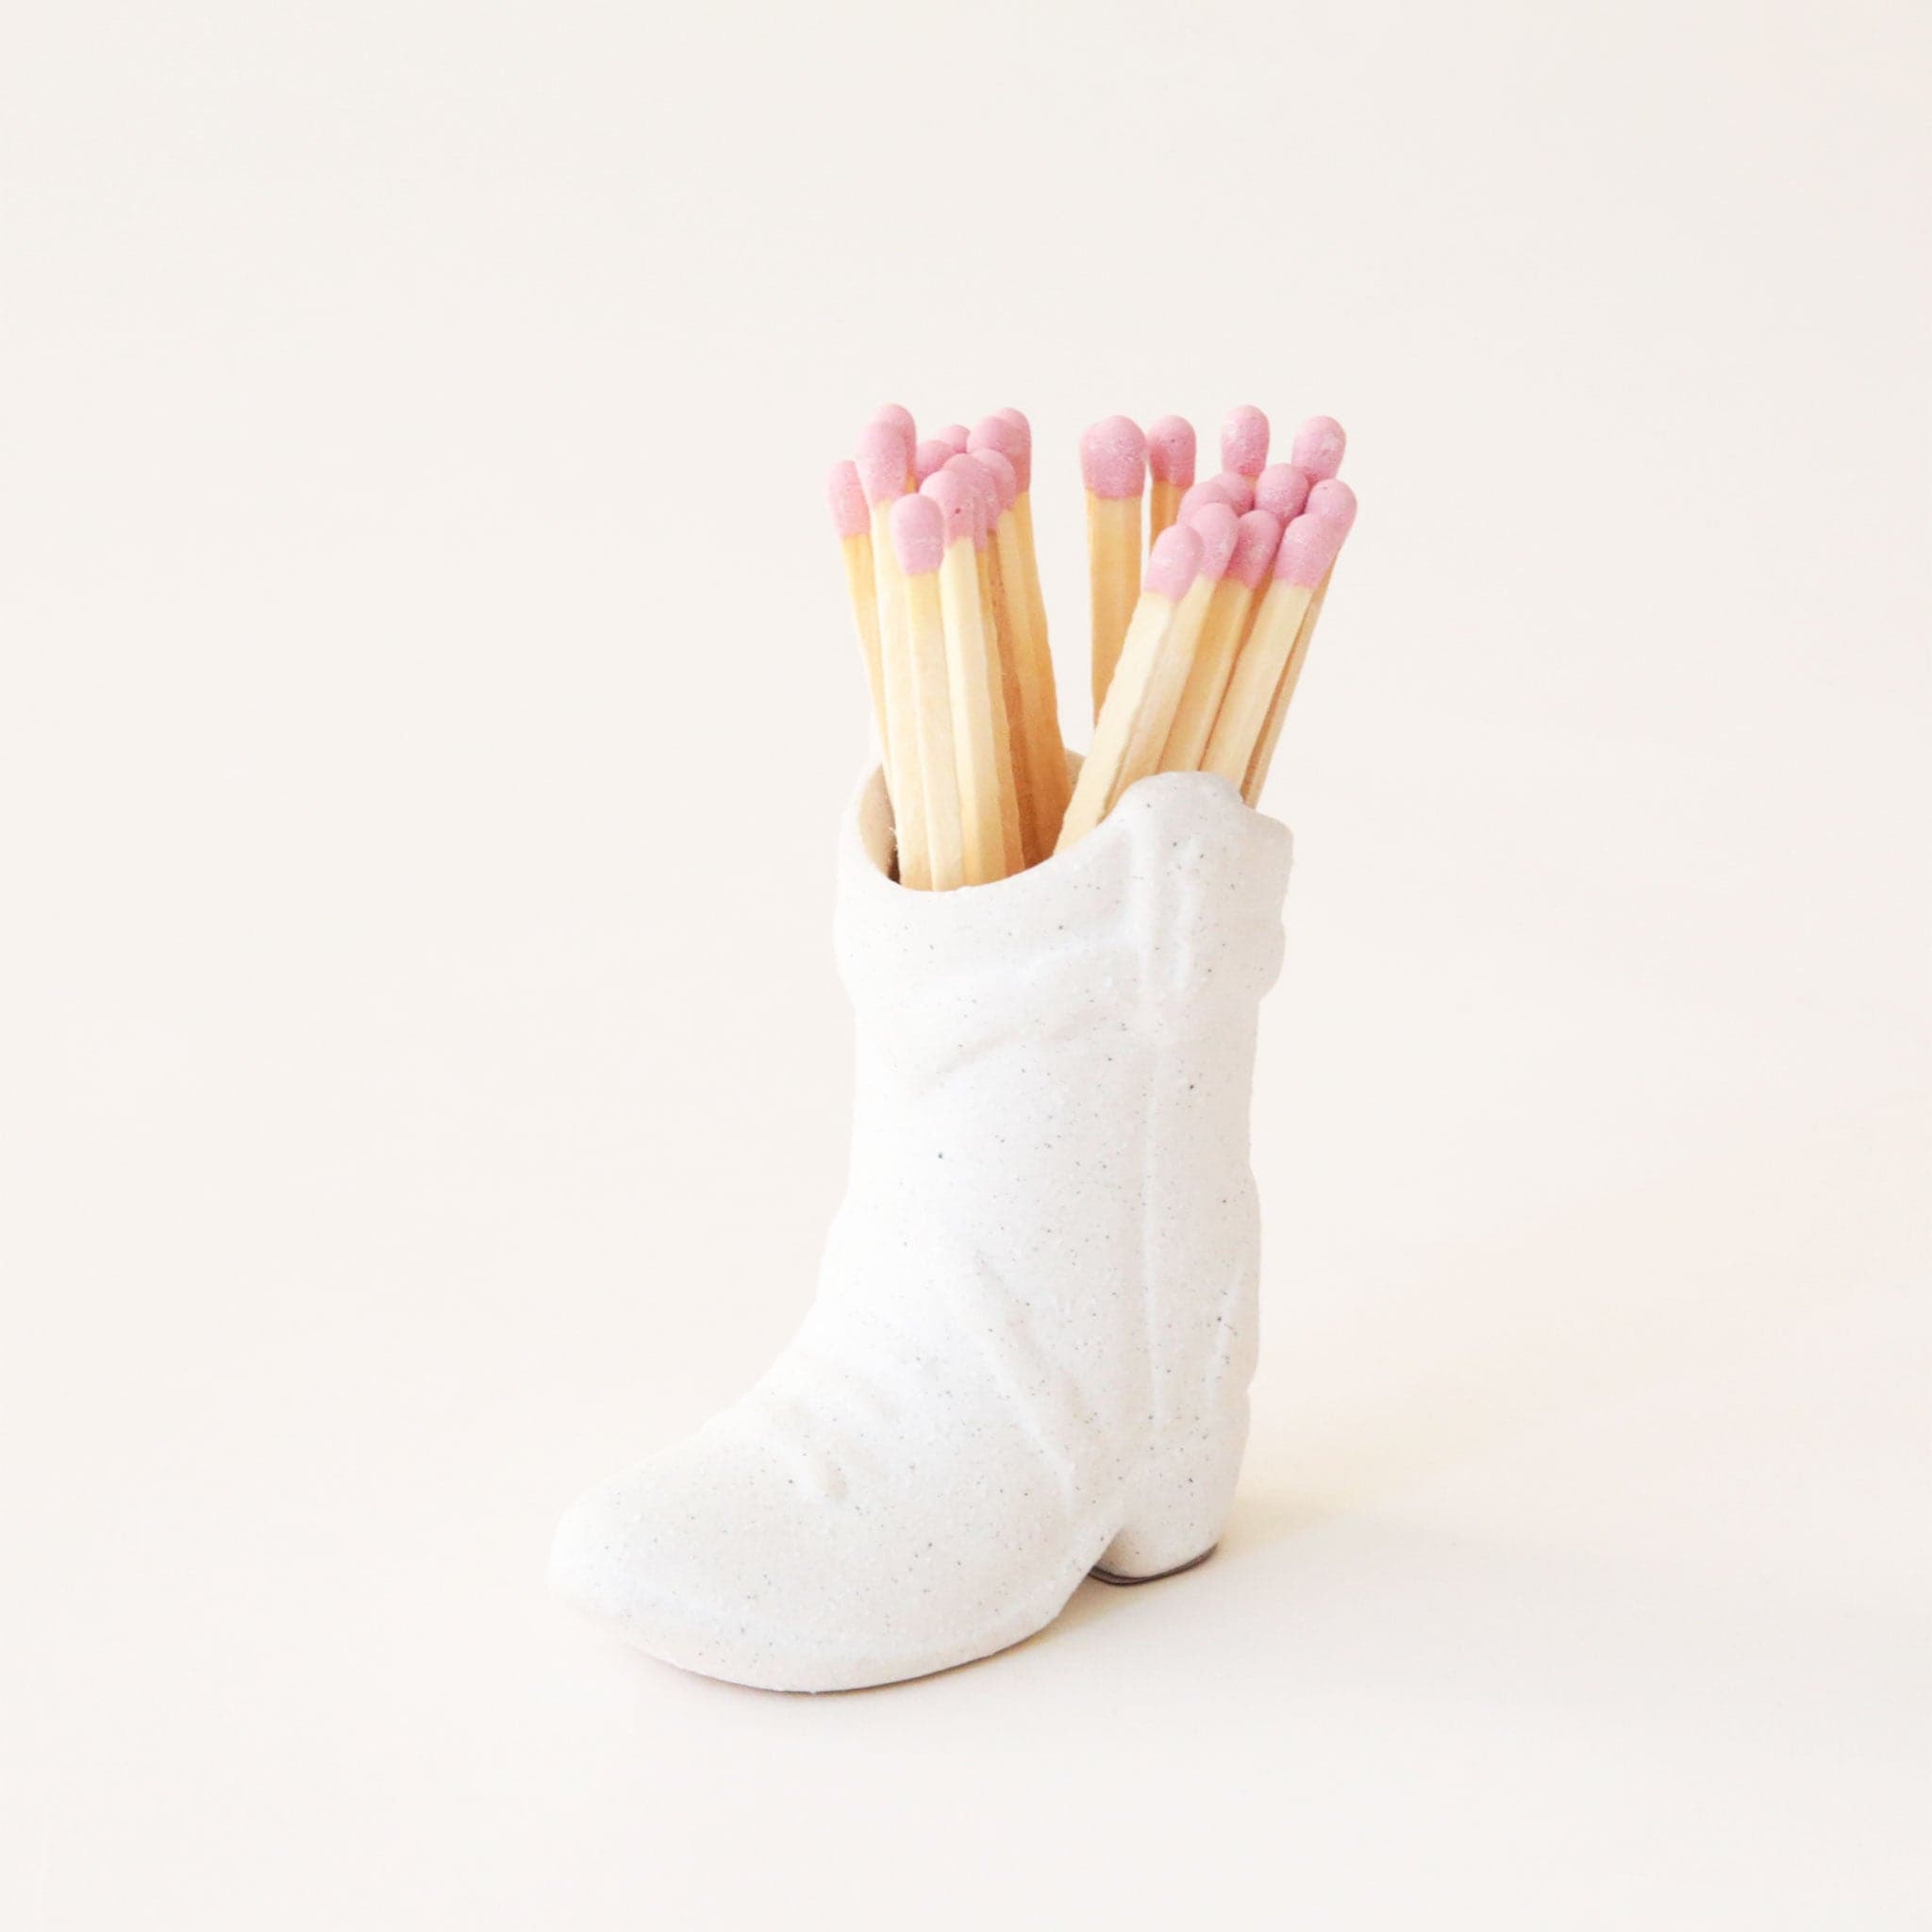 On a white background is a white cowgirl boot shaped match holder with pink matches inside.